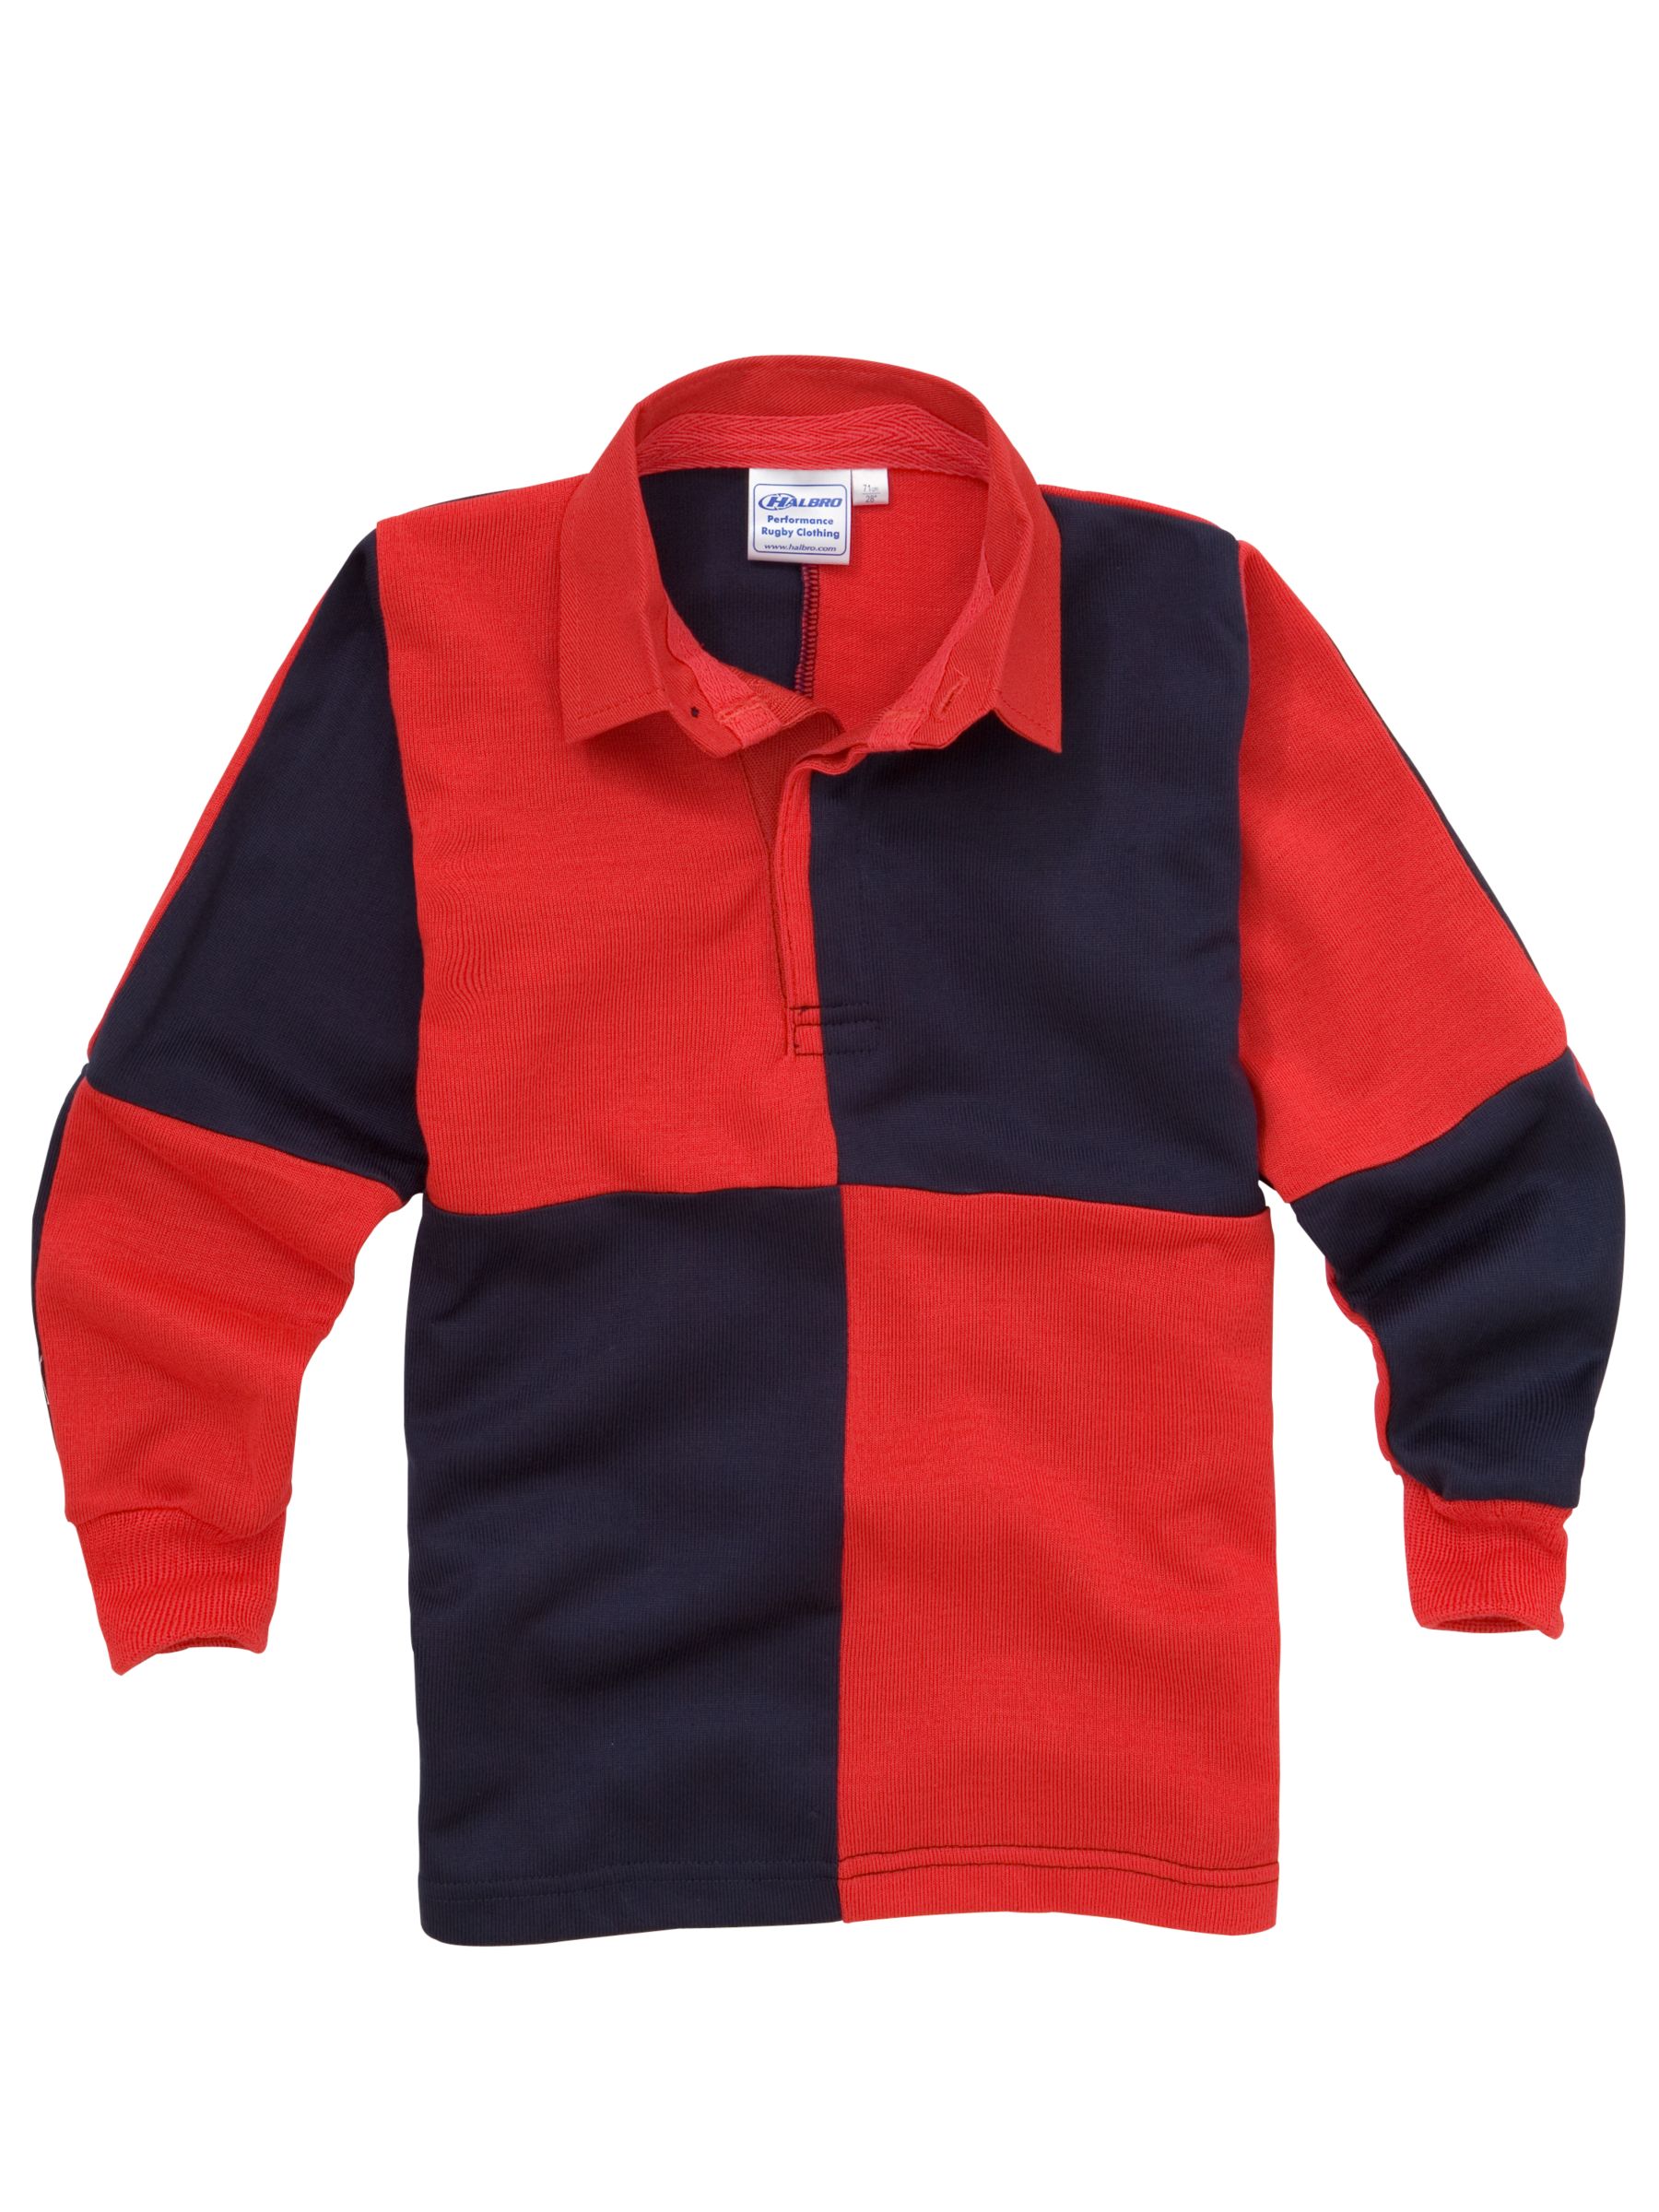 Schools Unisex Rugby Shirt, Navy/red